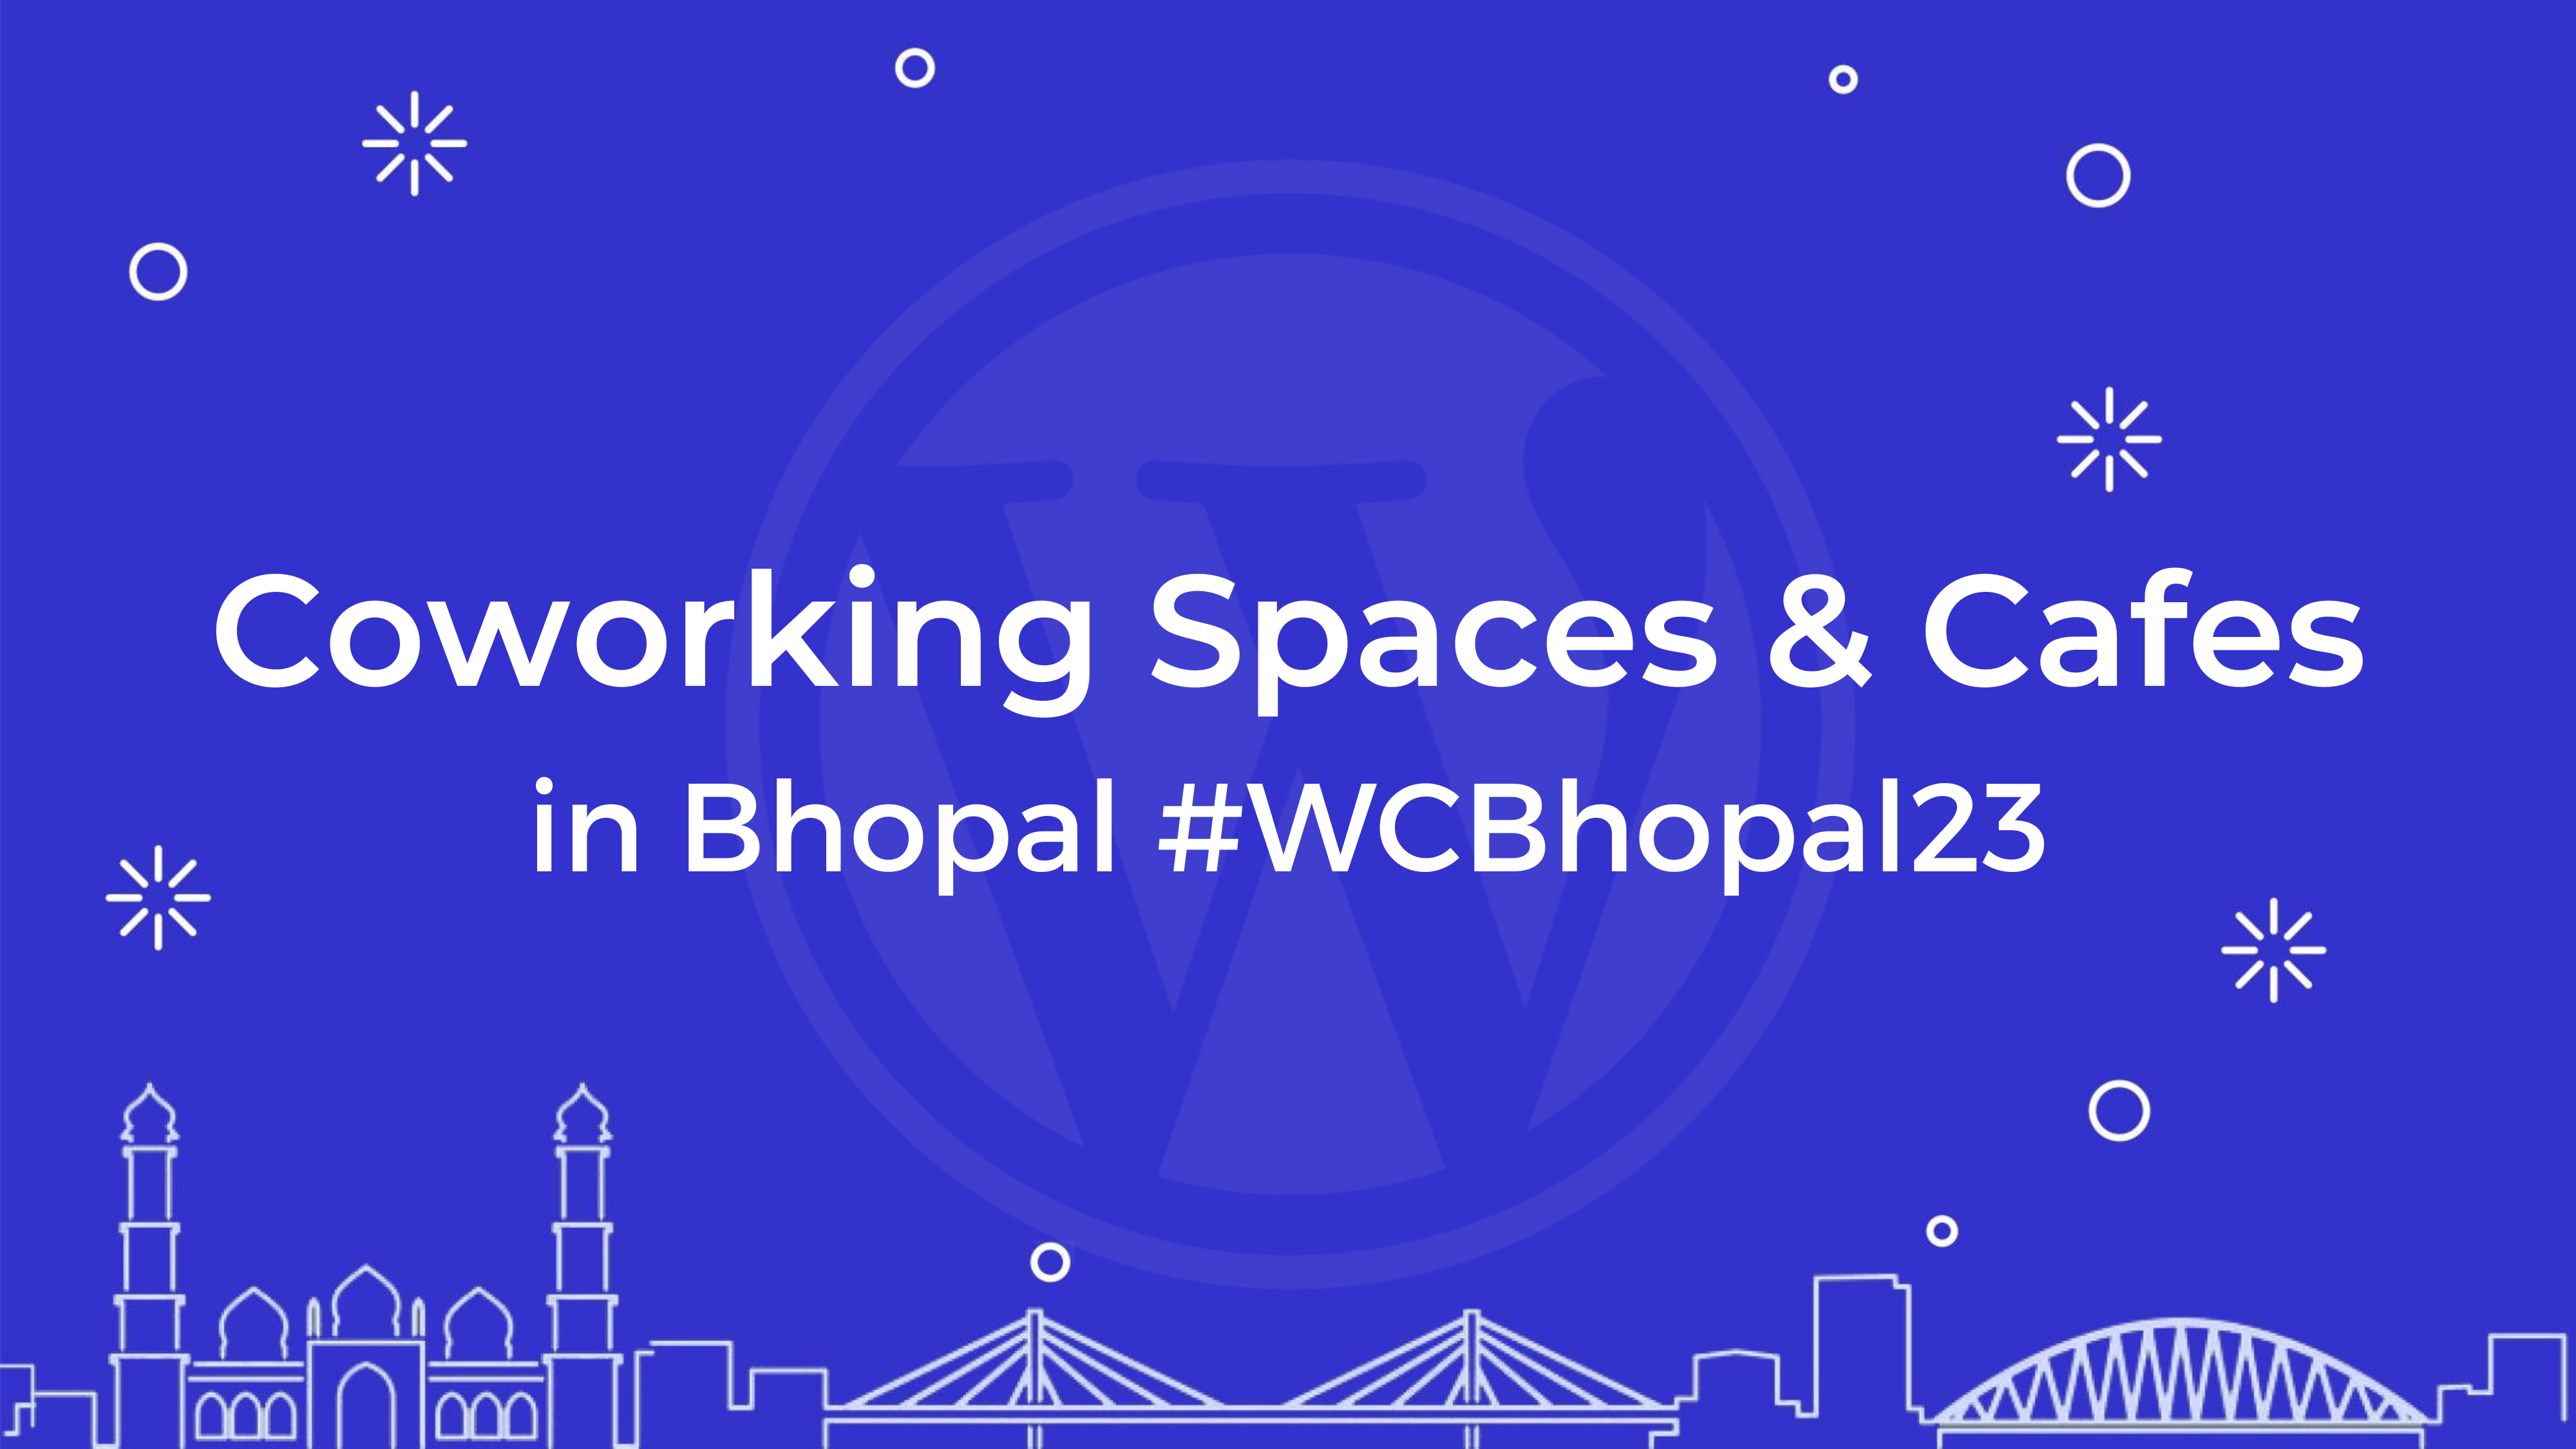 Coworking Spaces & Cafes to work from while attending #WCBhopal23